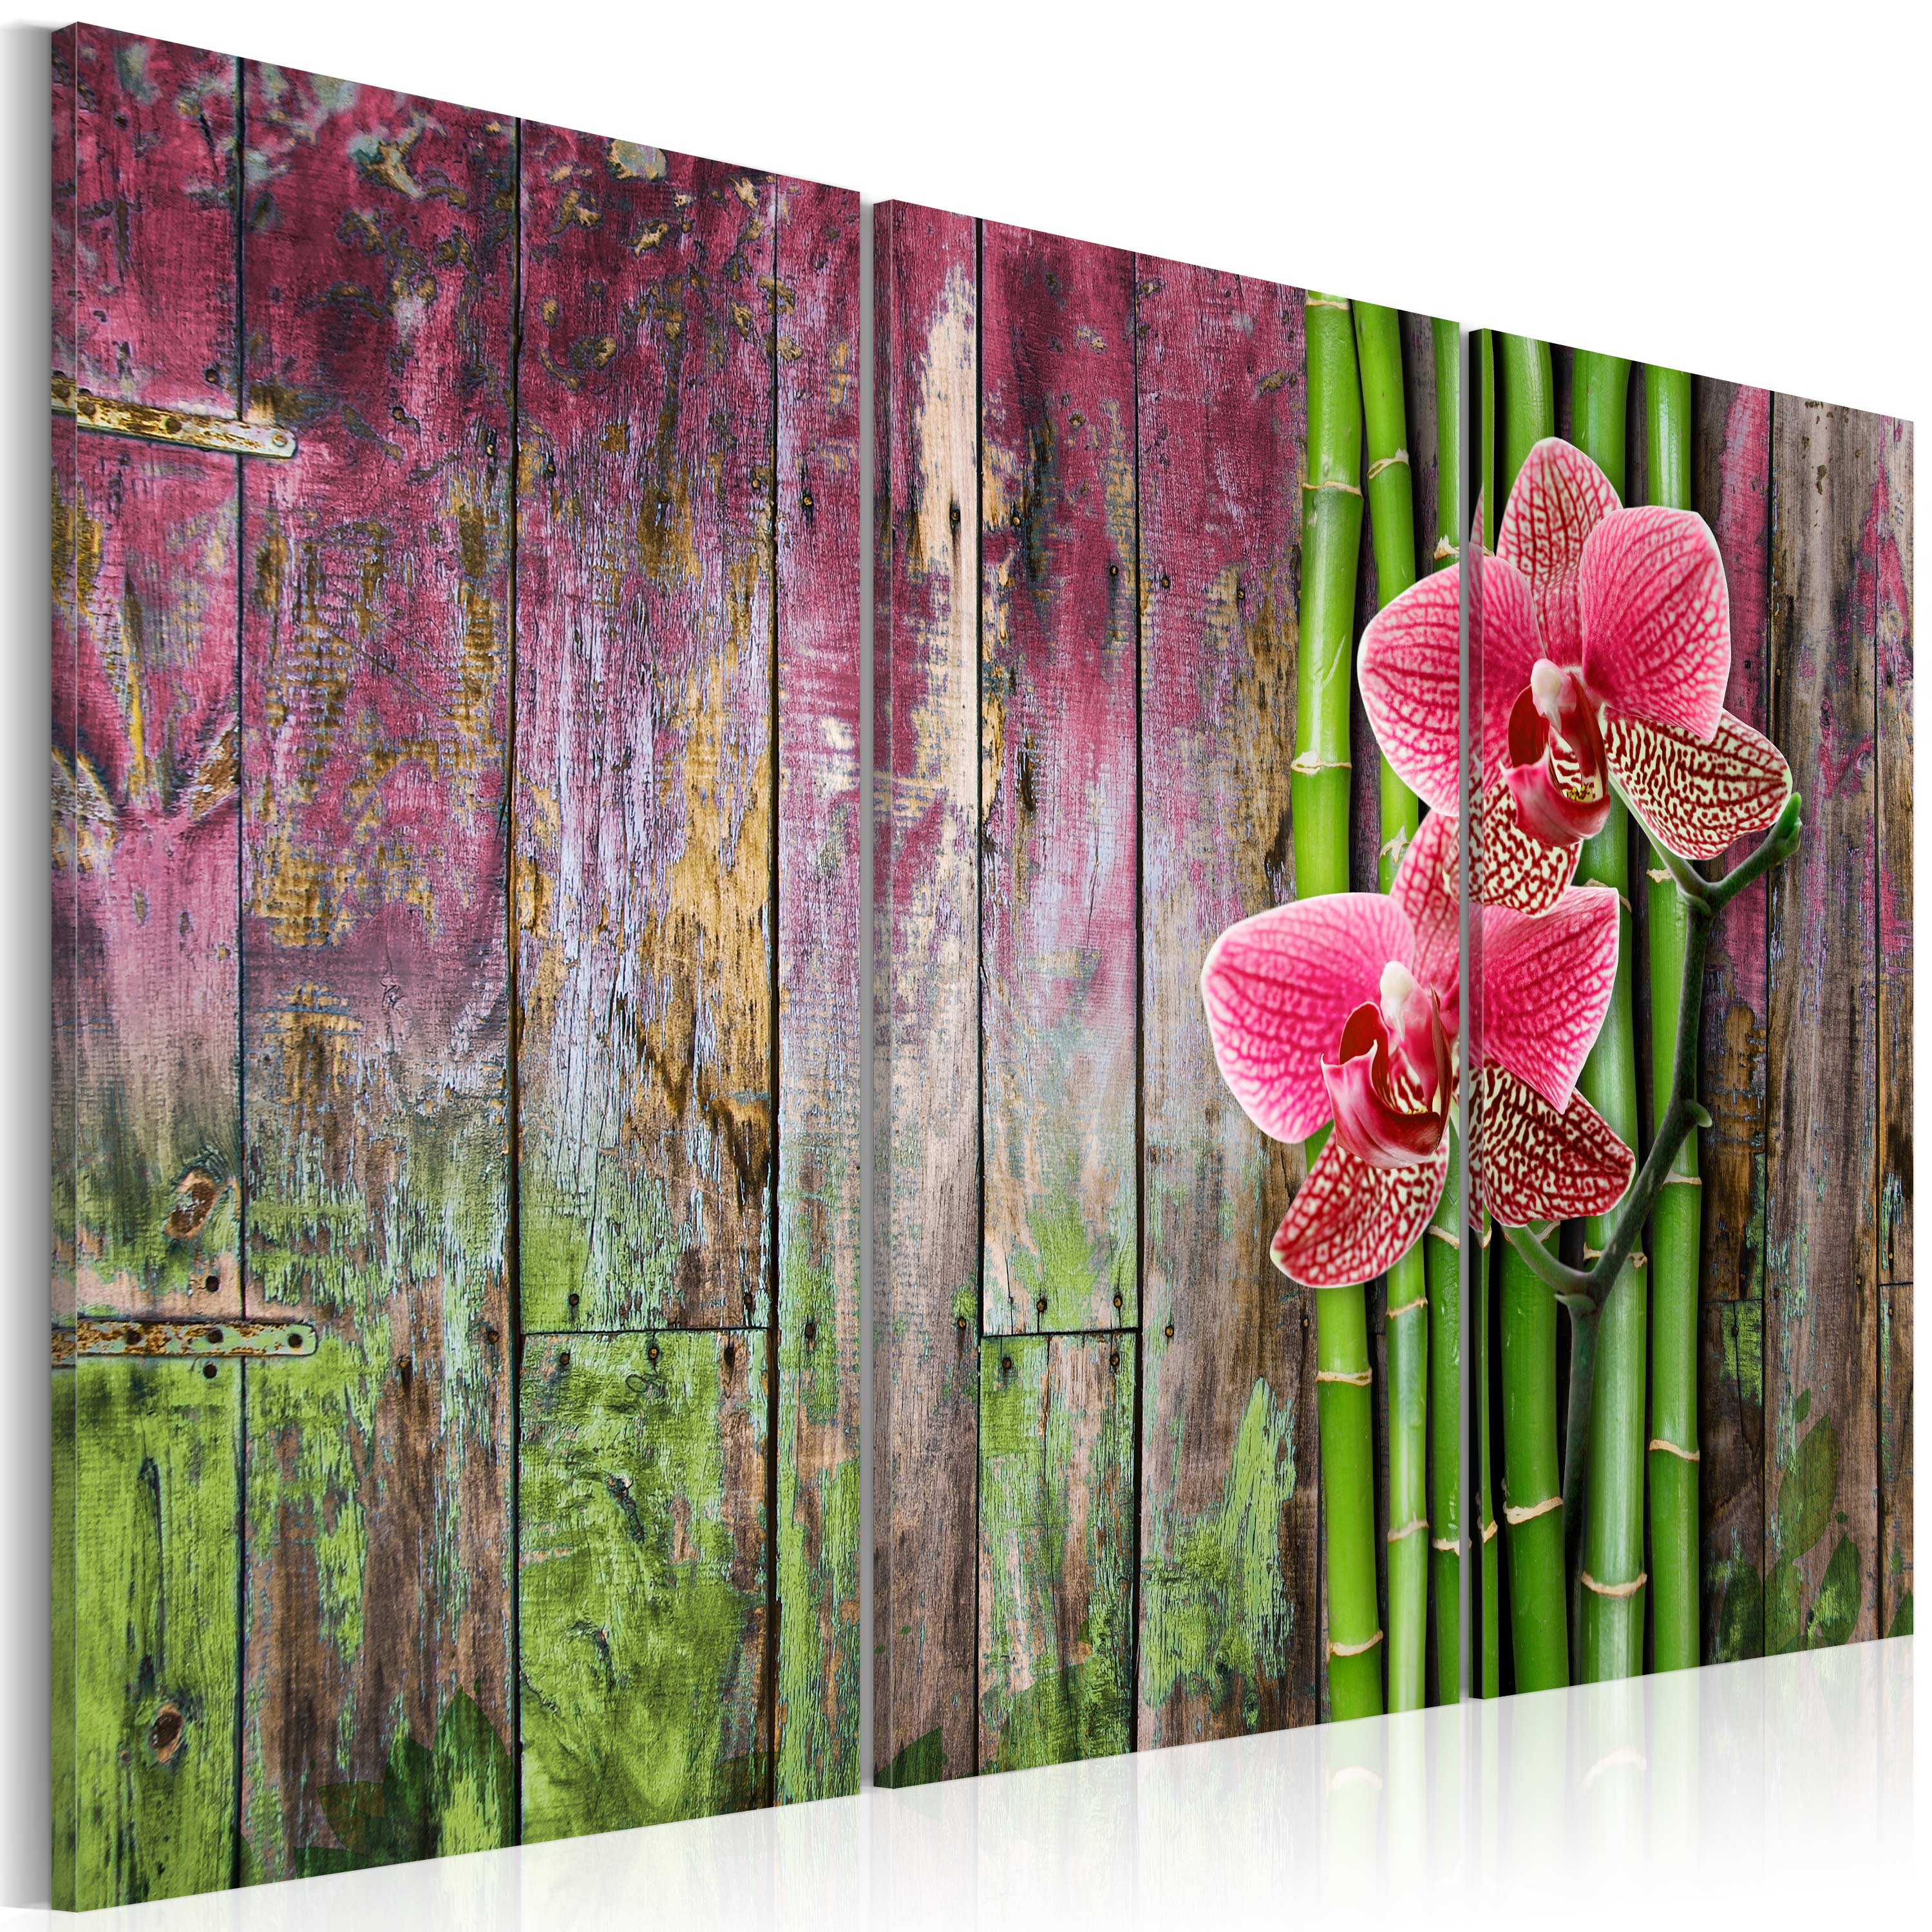 Canvas Print - Flower and bamboo - 120x80